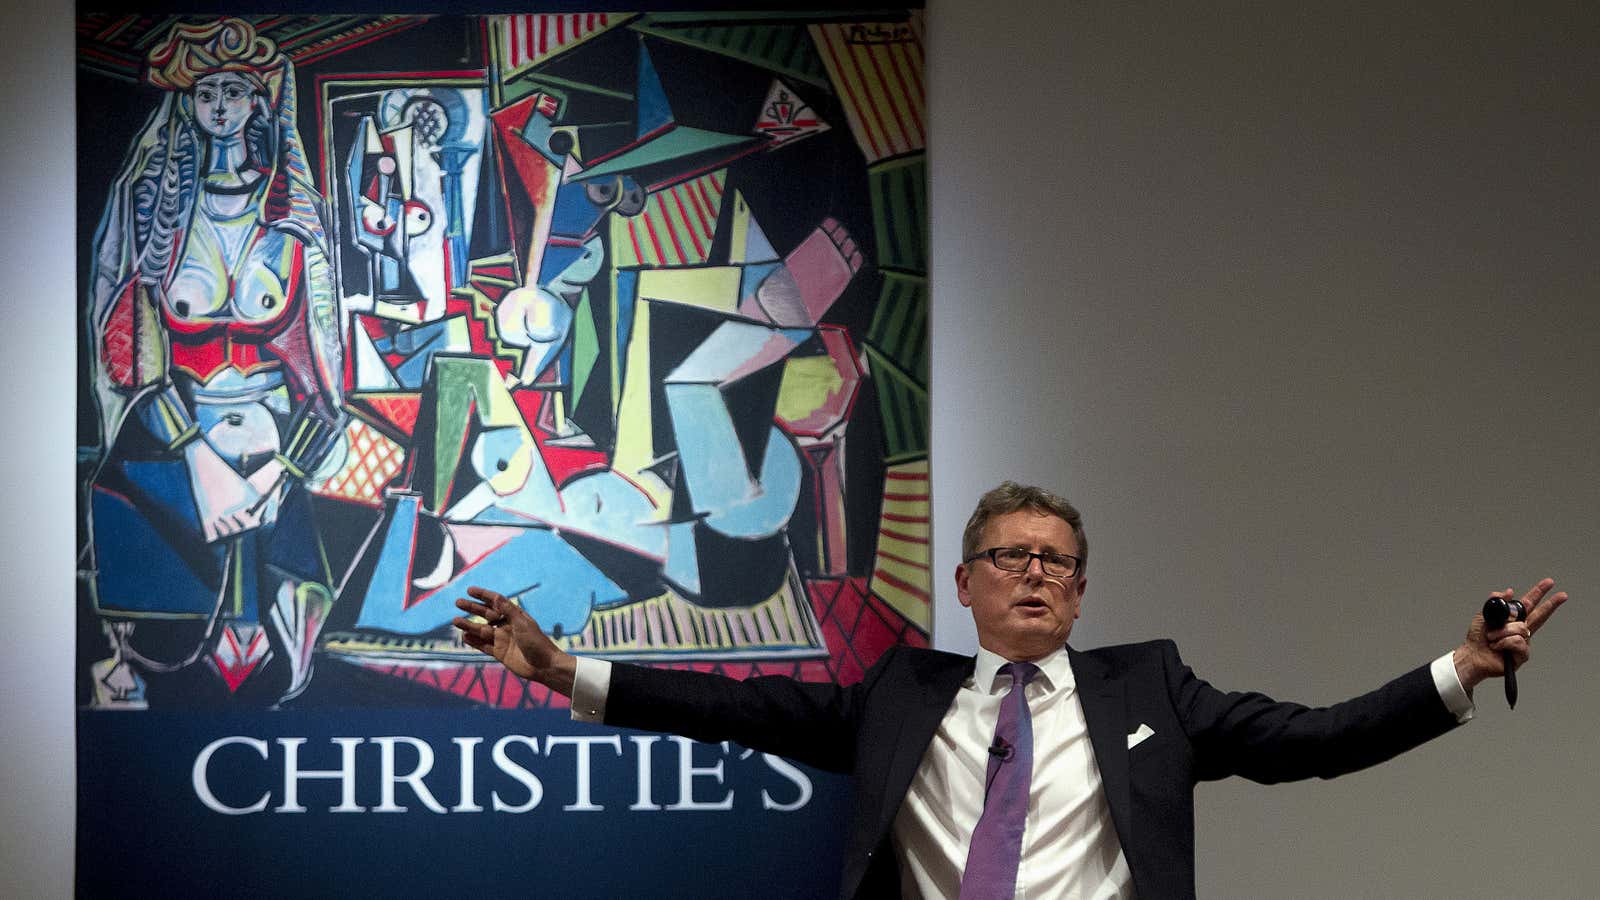 Auctioneer Jussi Pylkkanen calls for final bids before dropping the gavel as he sells Pablo Picasso’s “Les femmes d’Alger (Version ‘O’)” (Women of Algiers) at Christie’s.